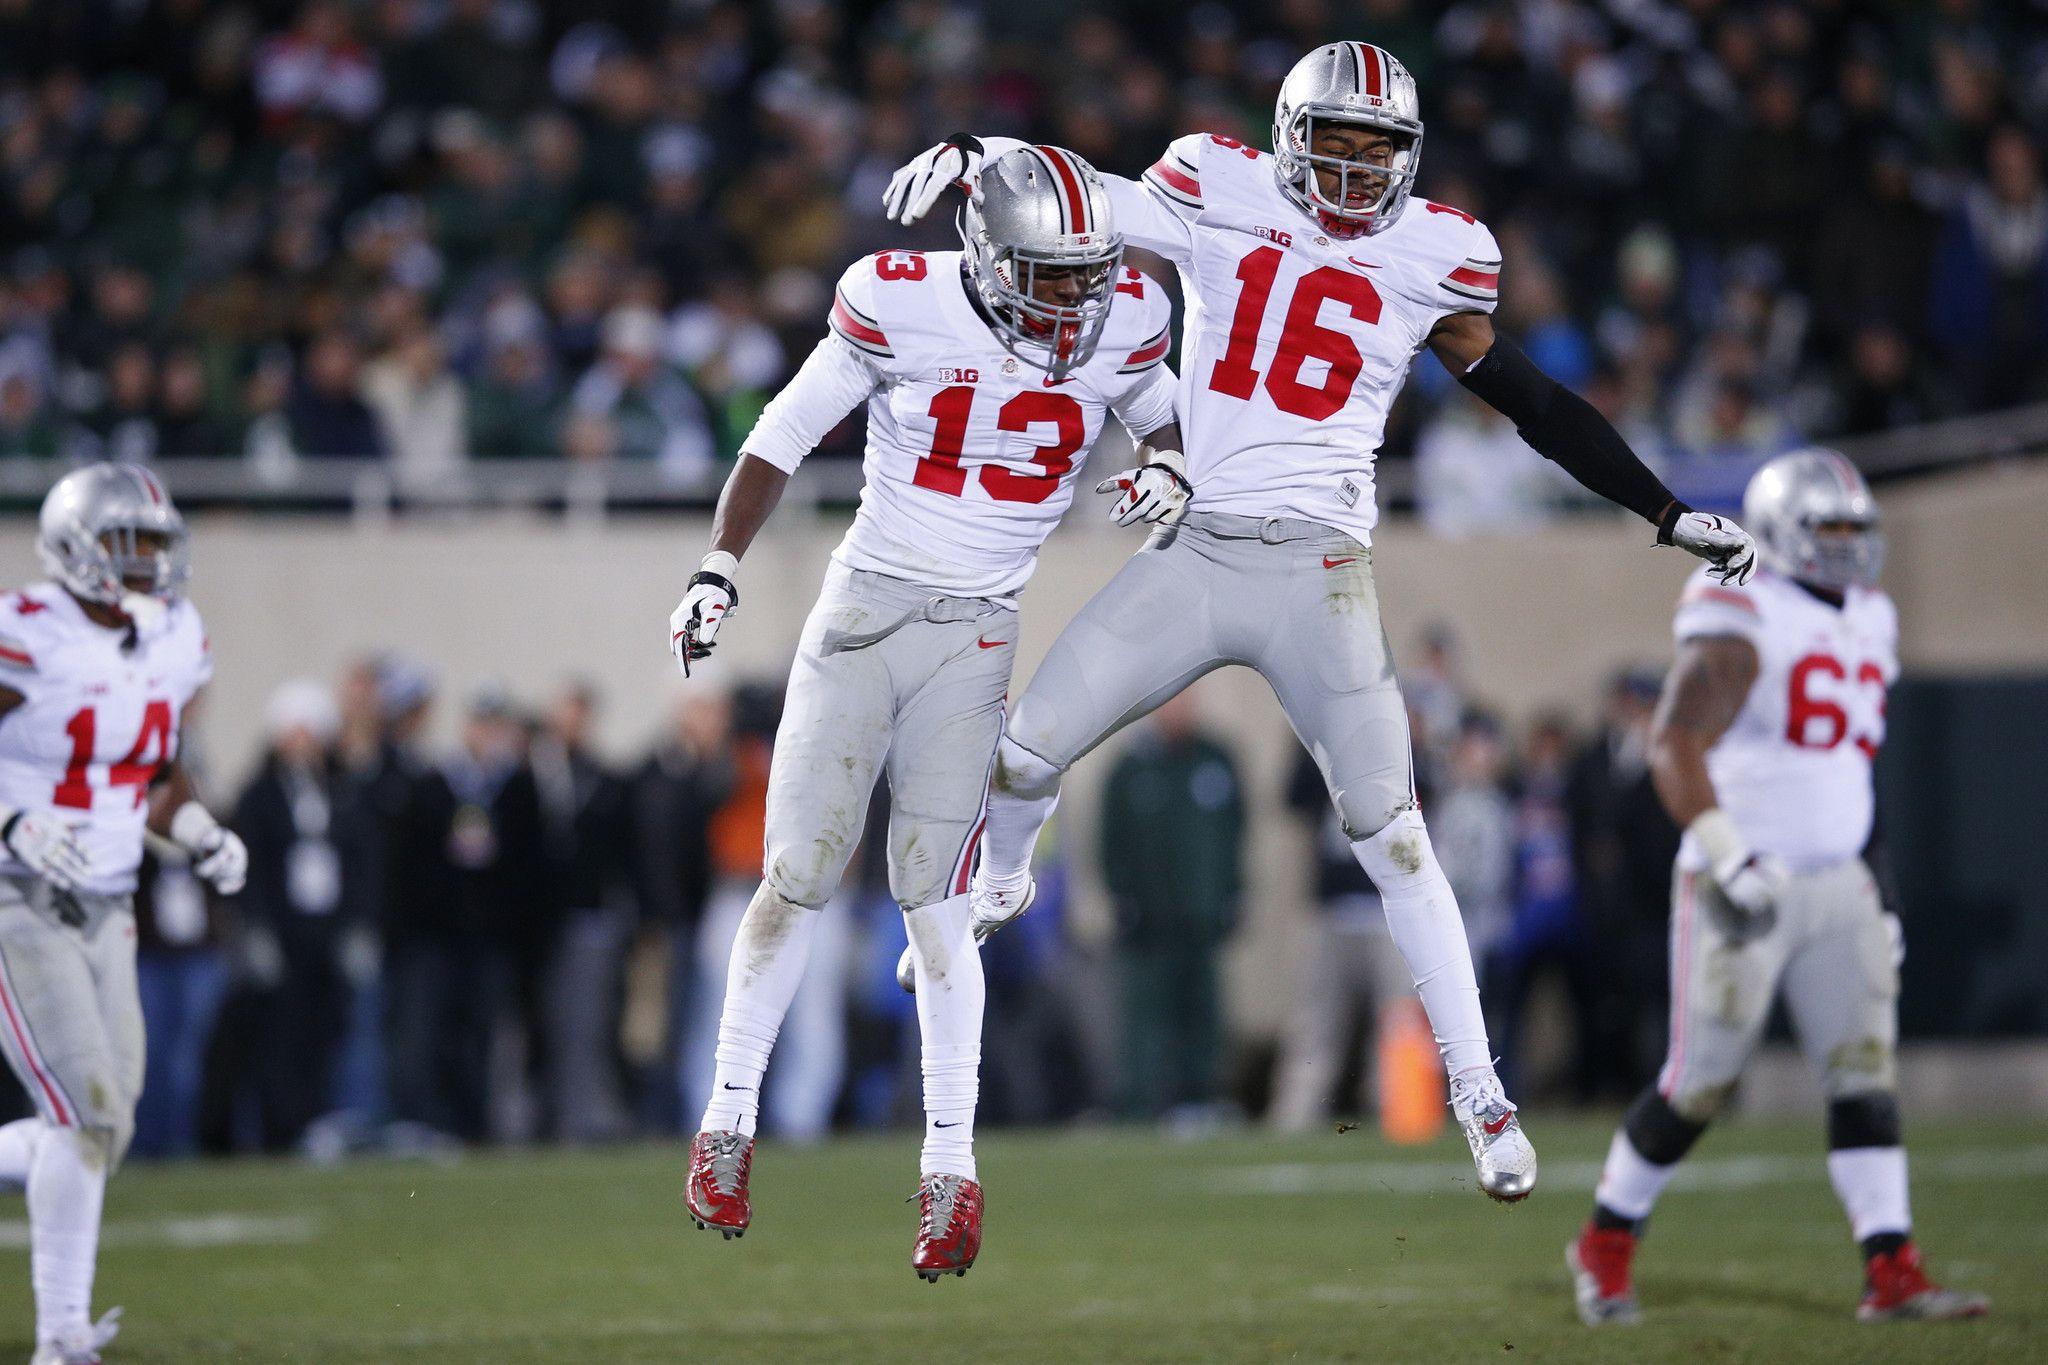 J.T. Barrett And Ohio State Keep Focus In 49 37 Victory